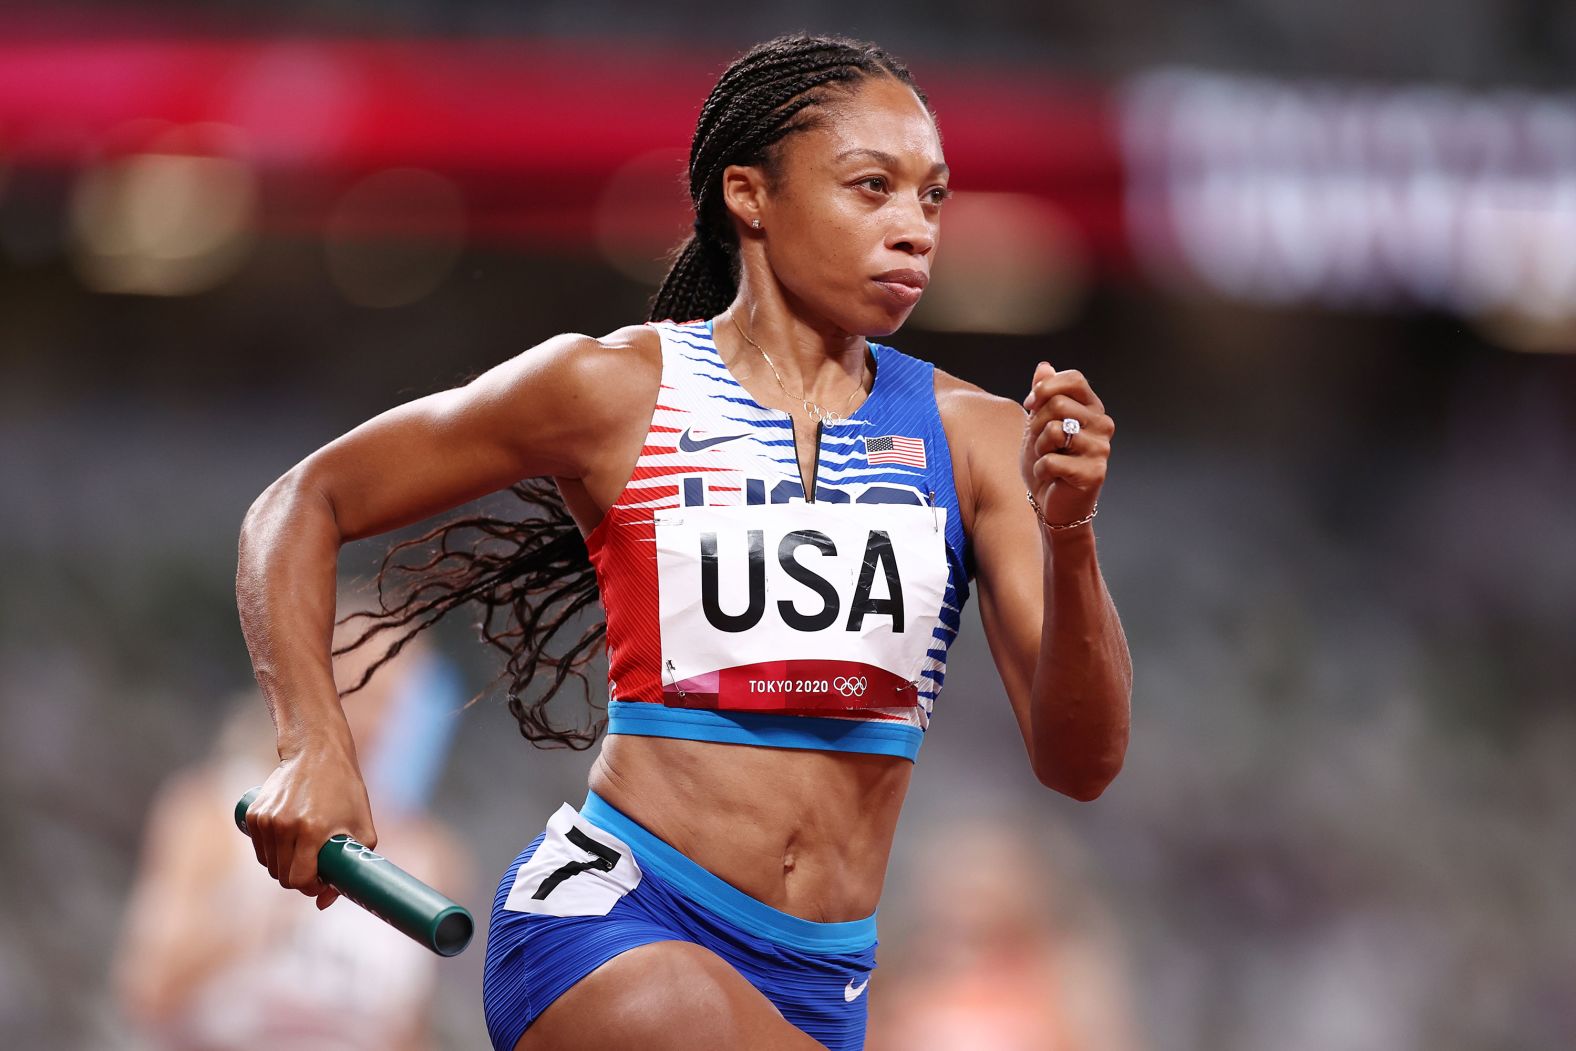 The United States' Allyson Felix runs in the 4x400-meter relay on August 7. The US team won gold, making Felix <a href="index.php?page=&url=https%3A%2F%2Fwww.cnn.com%2Fworld%2Flive-news%2Ftokyo-2020-olympics-08-07-21-spt%2Fh_6df17226e0ece94448232298e60511db" target="_blank">the most decorated American athlete in Olympic track-and-field history.</a>